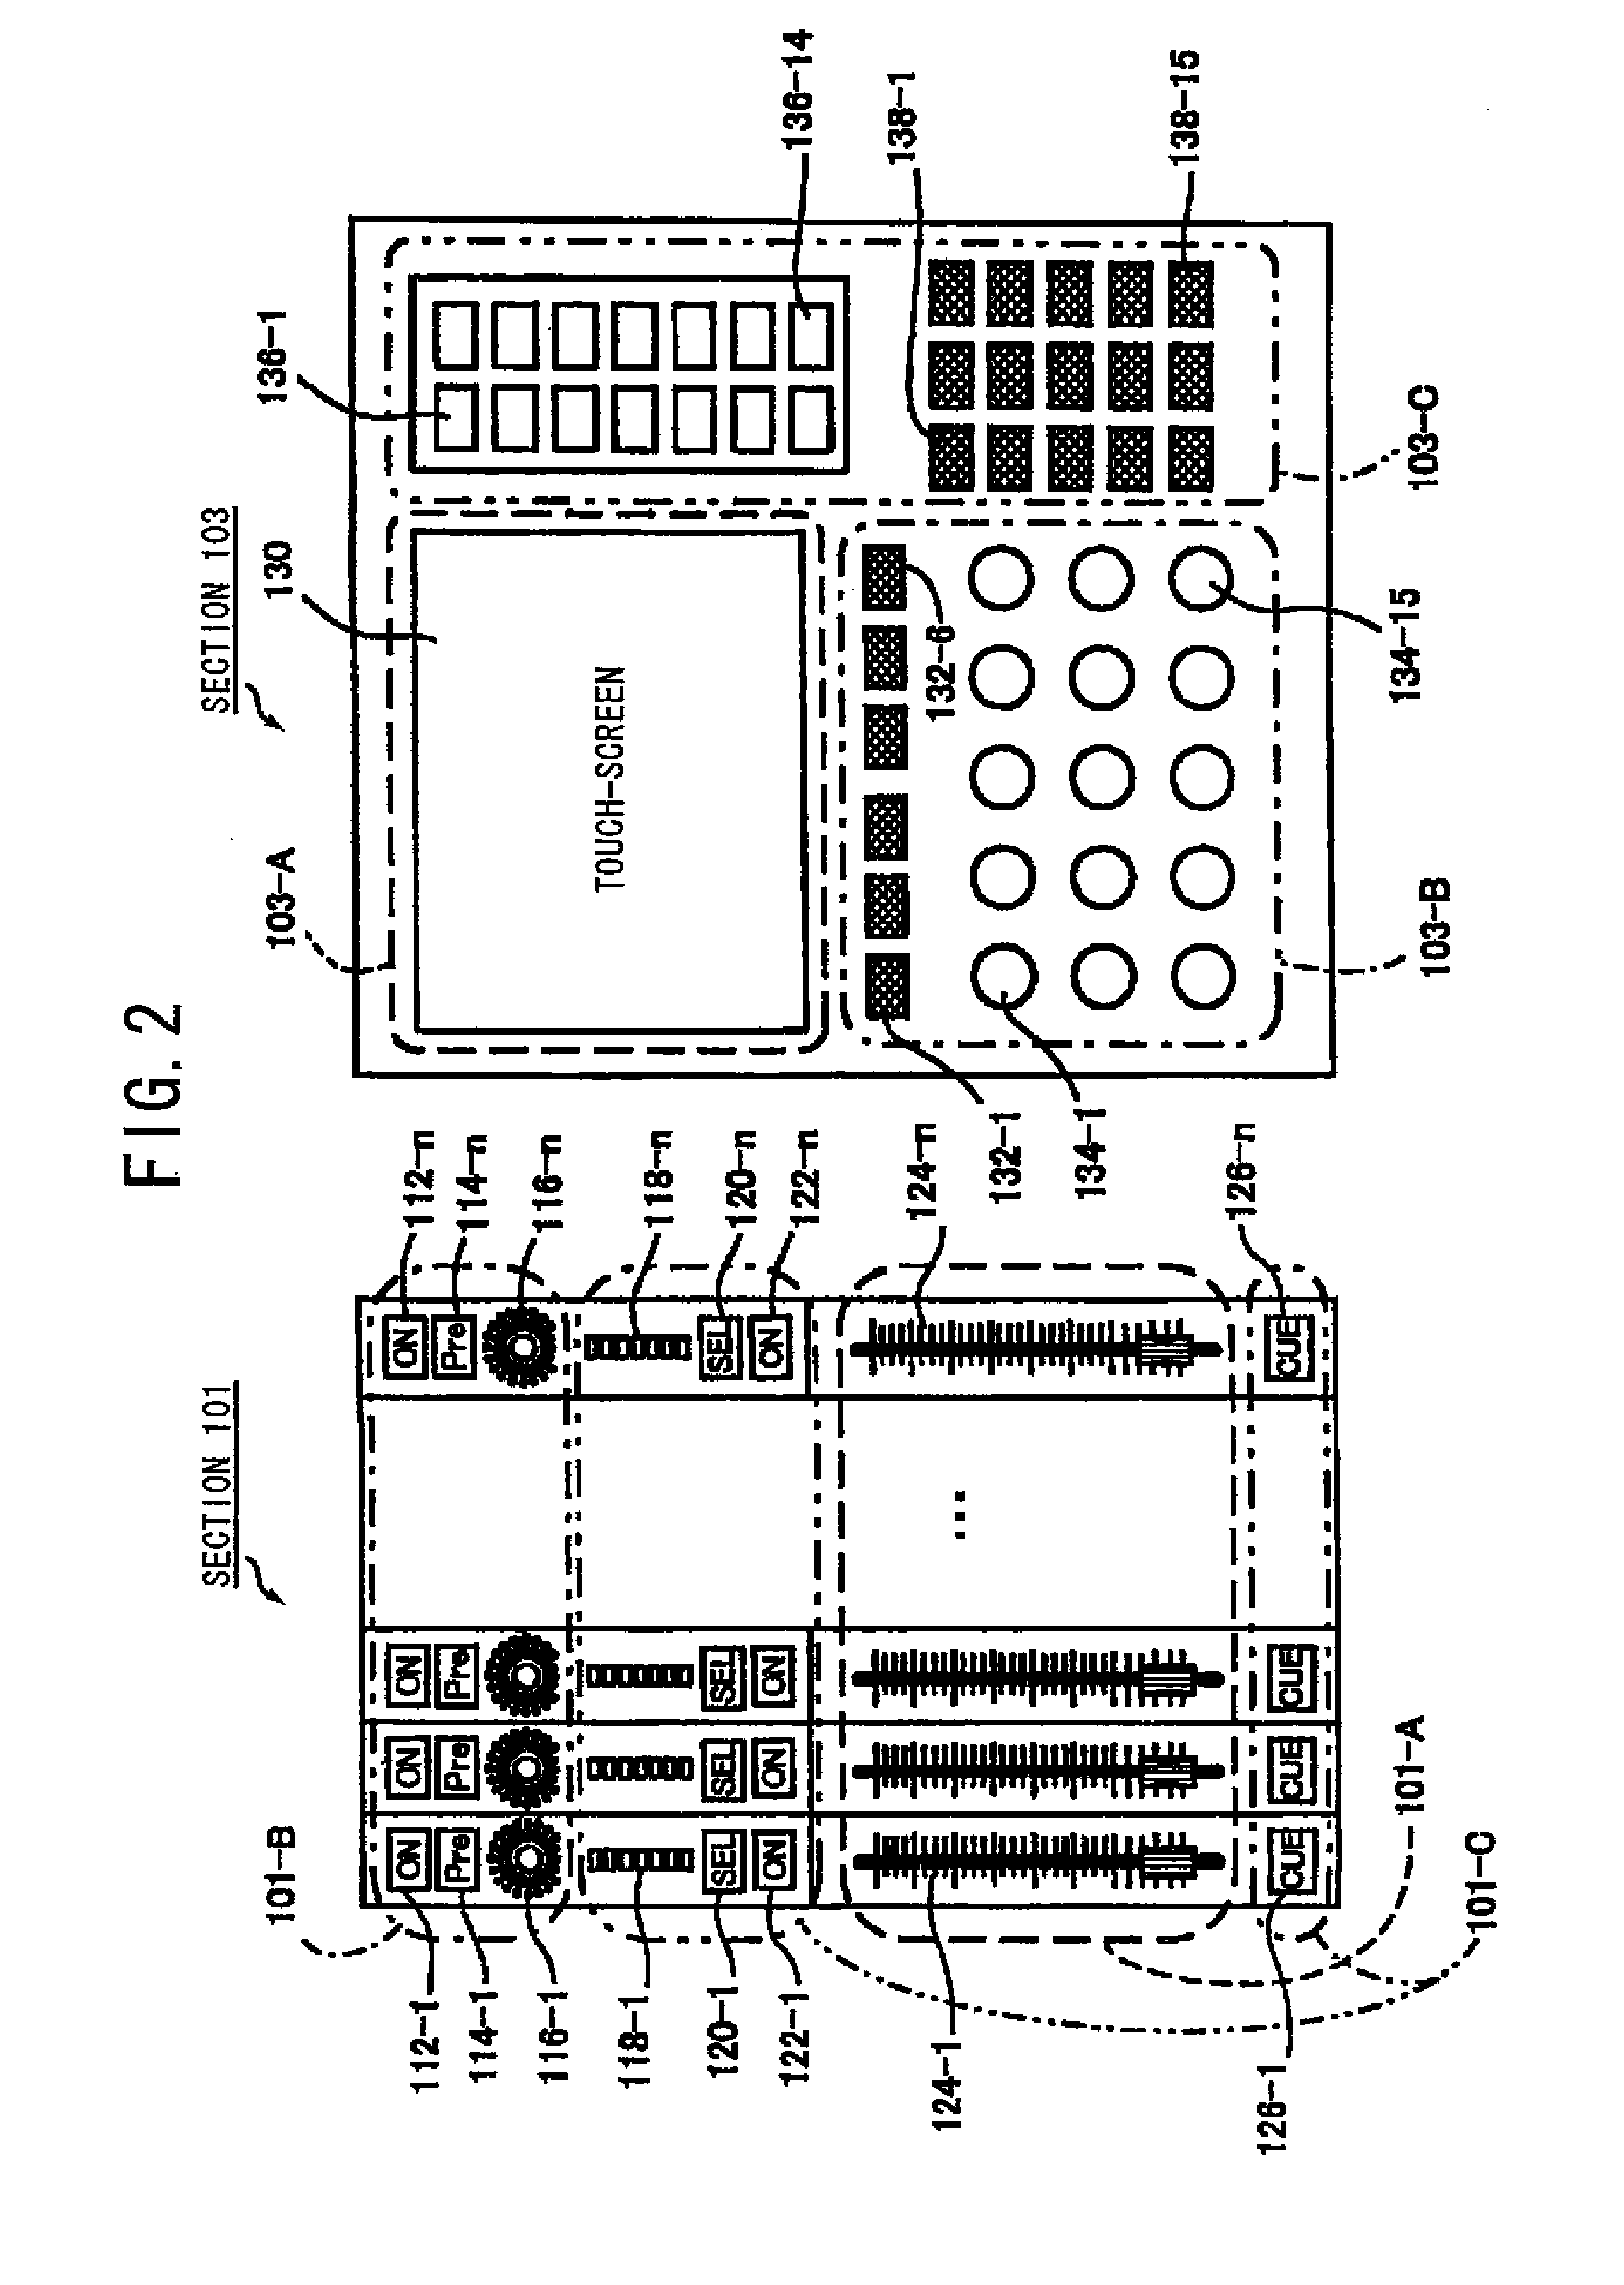 Control system and communication system for digital mixer